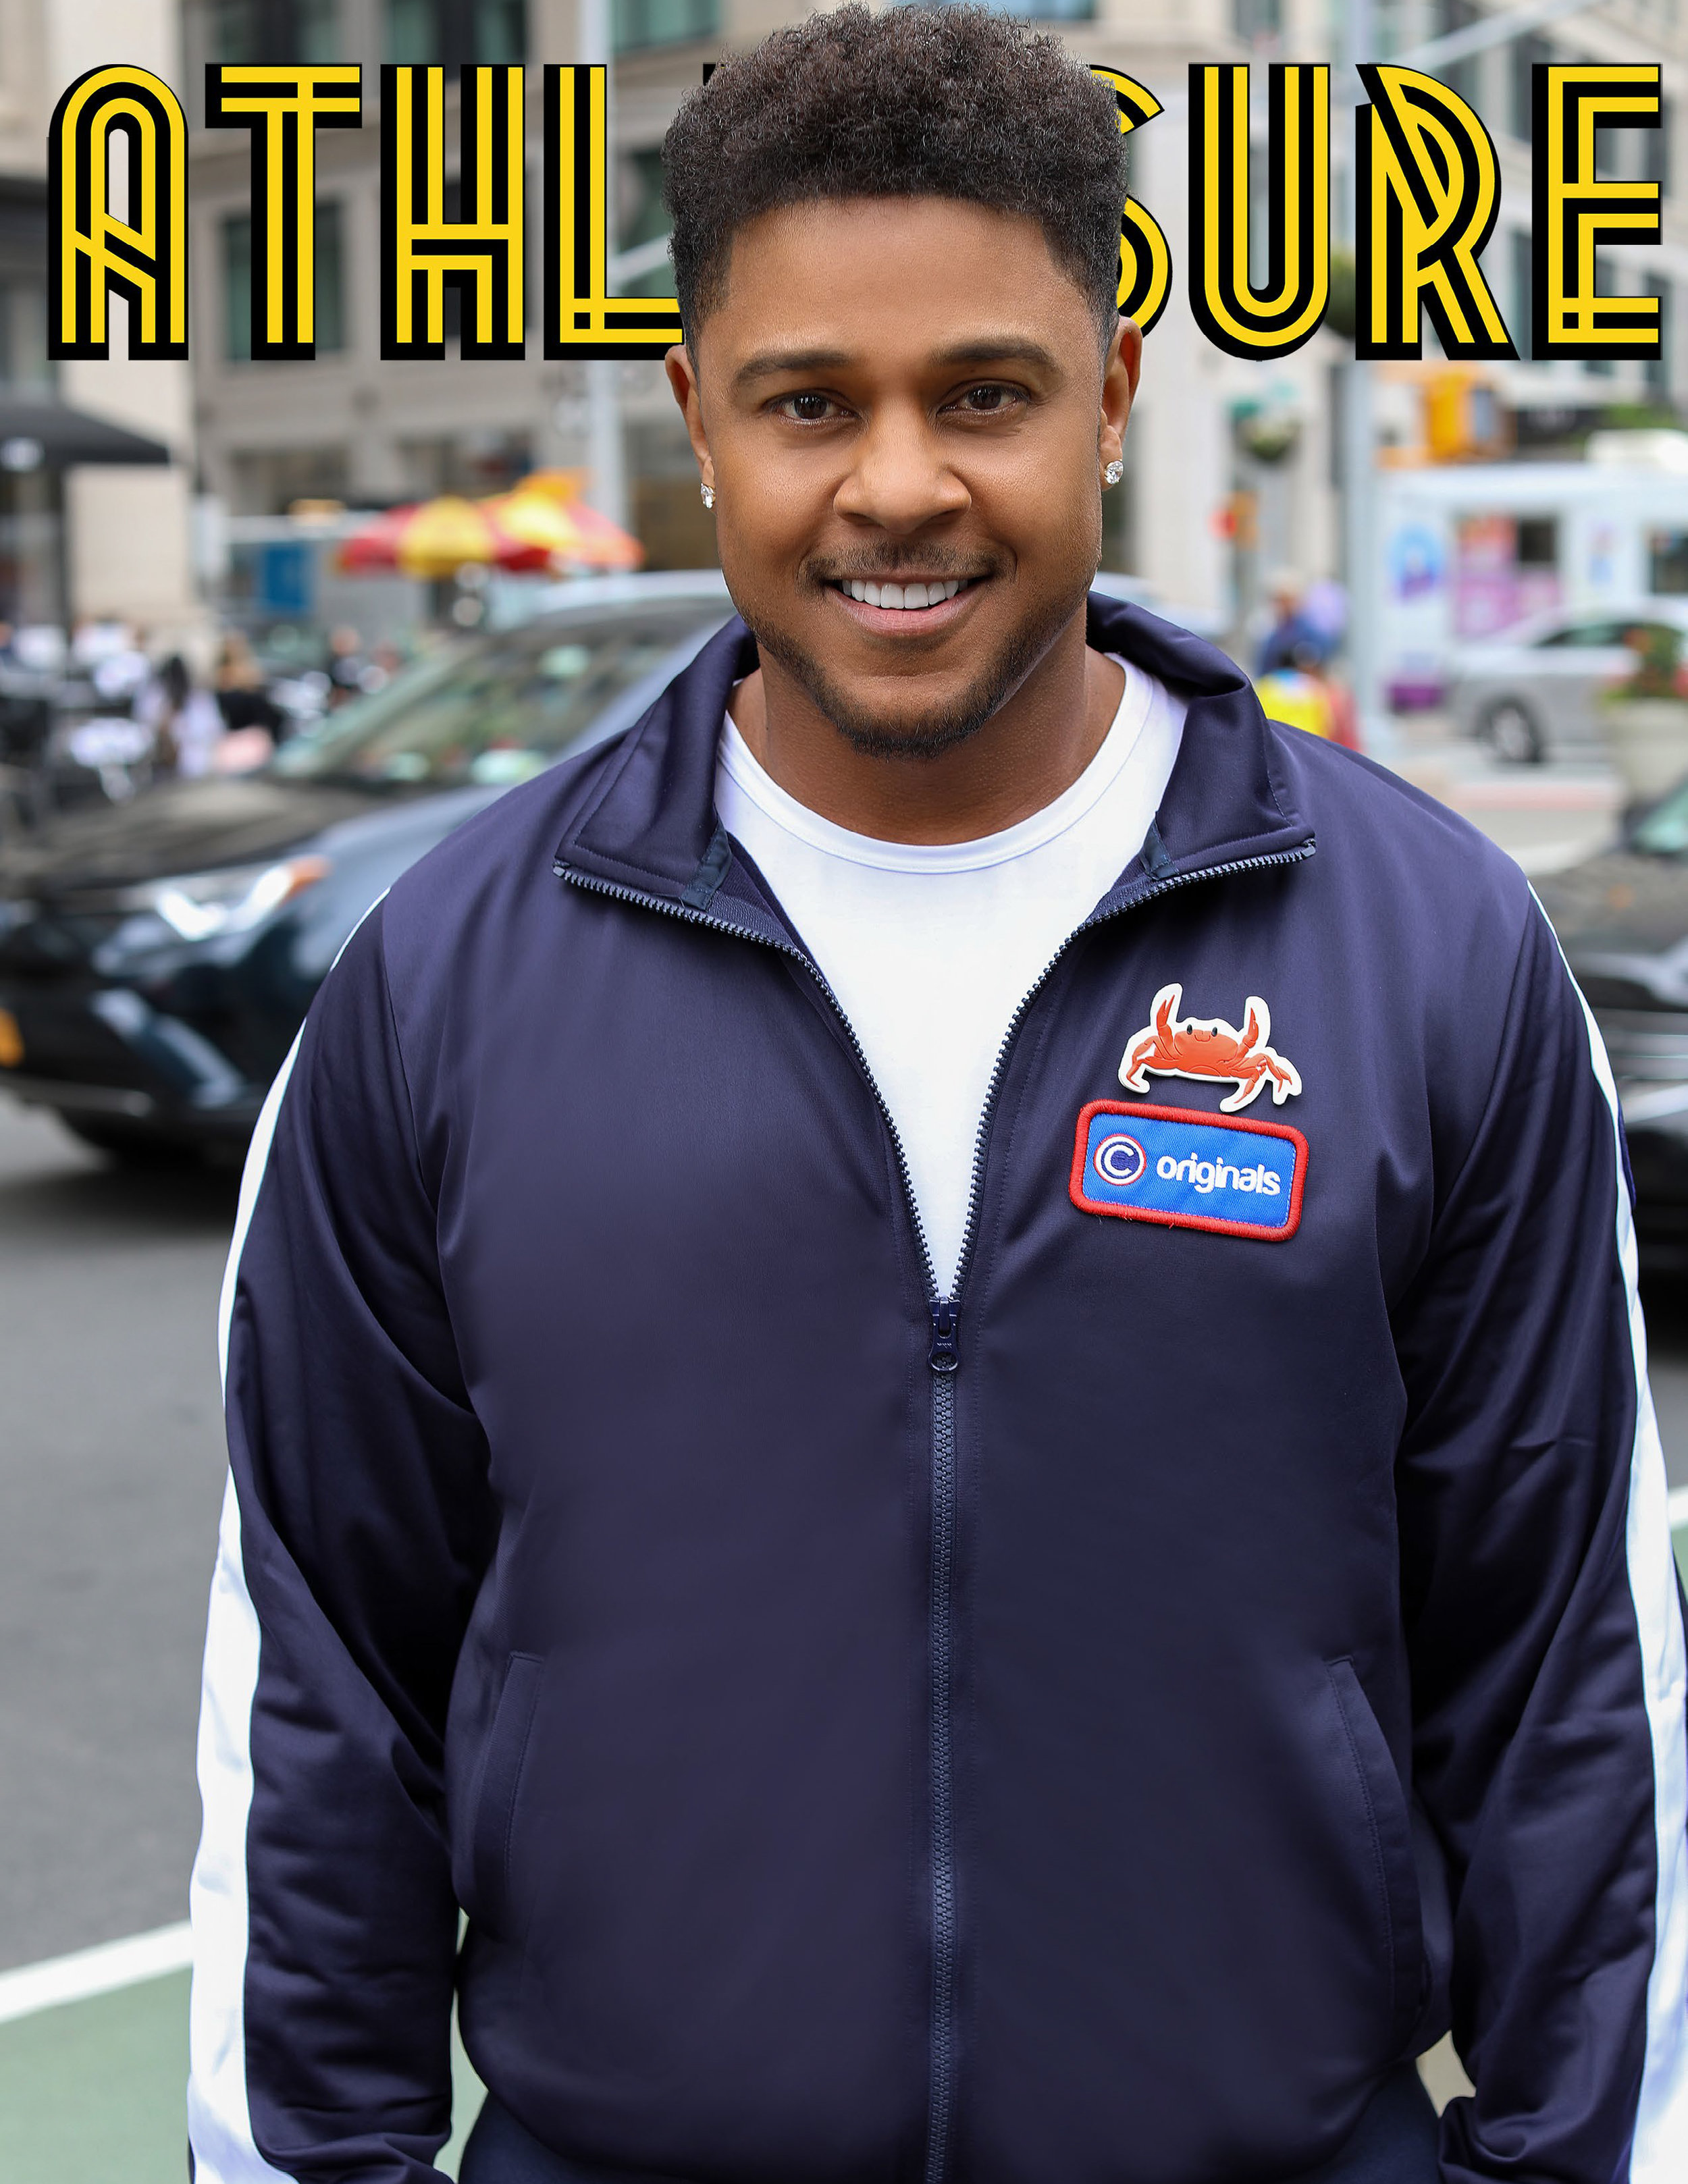 AM JUN HITTING THE STREETS WITH POOCH HALL FRONT COVER-1.jpg